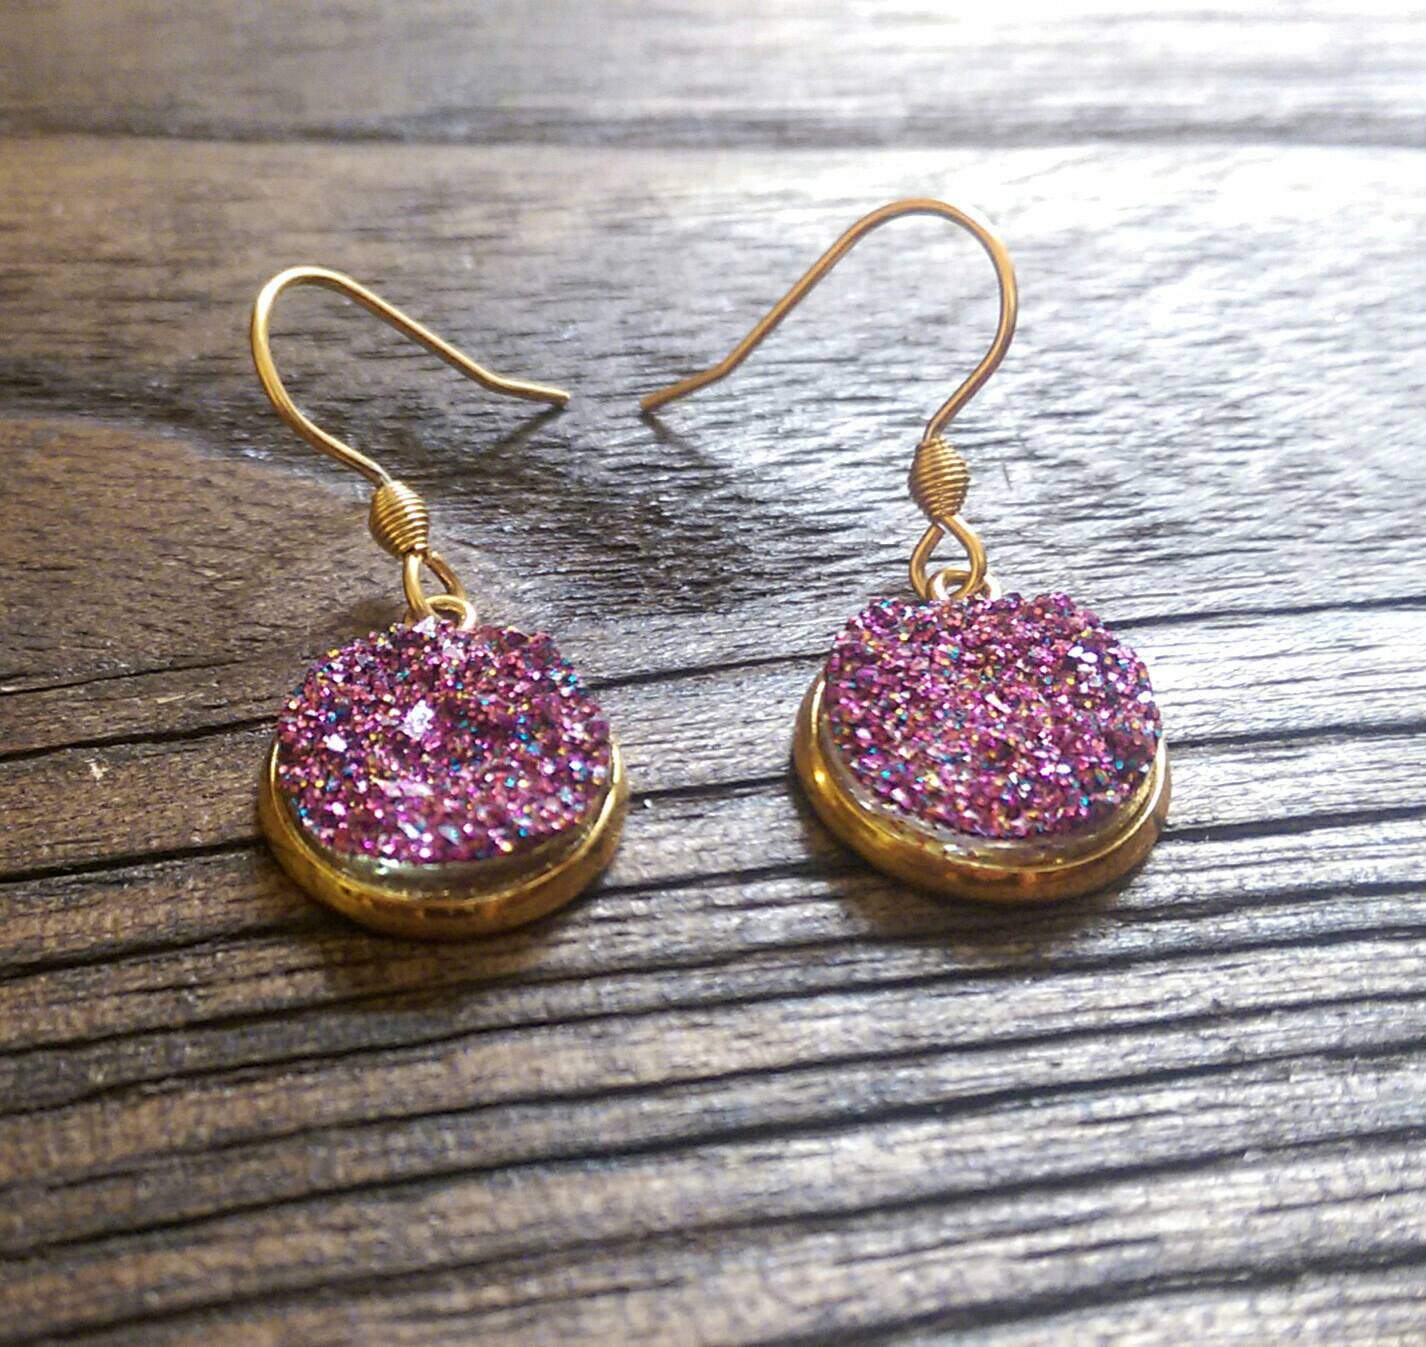 Sparkly Faux Druzy Dangle Earrings made of Stainless Steel Gold Choose colour 12mm